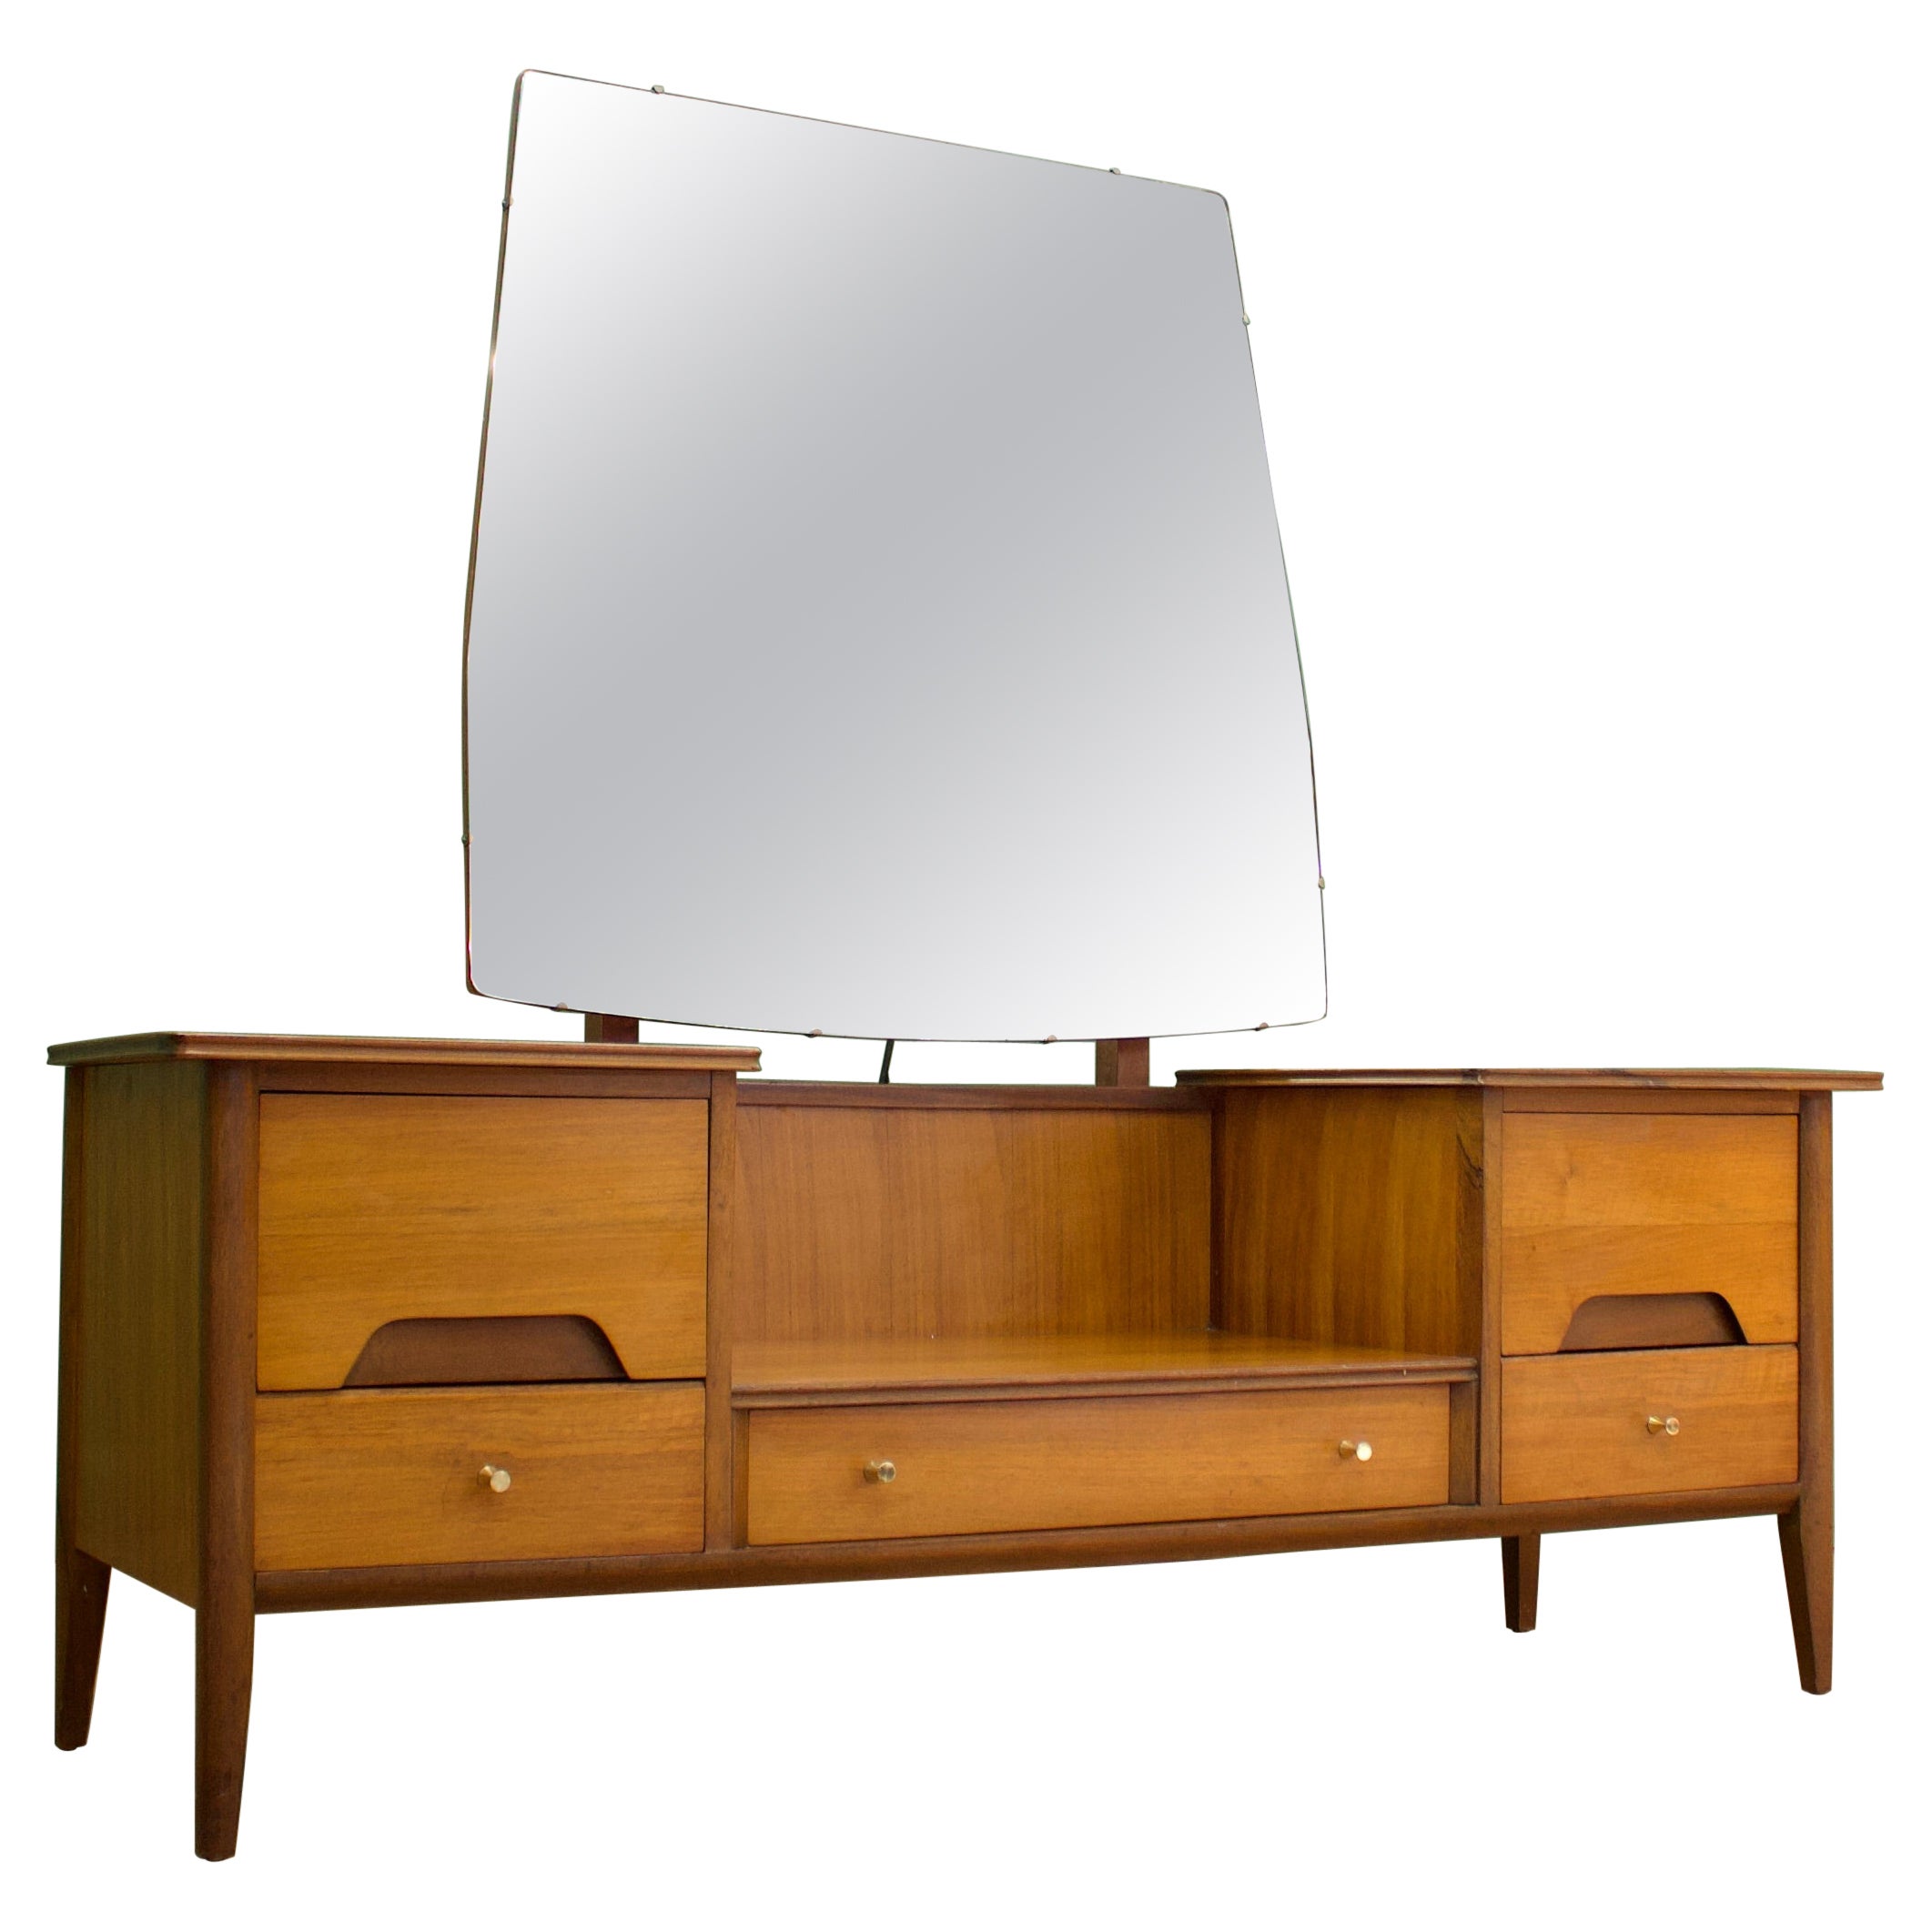 Midcentury Dressing Table in Walnut from Younger, 1960s For Sale